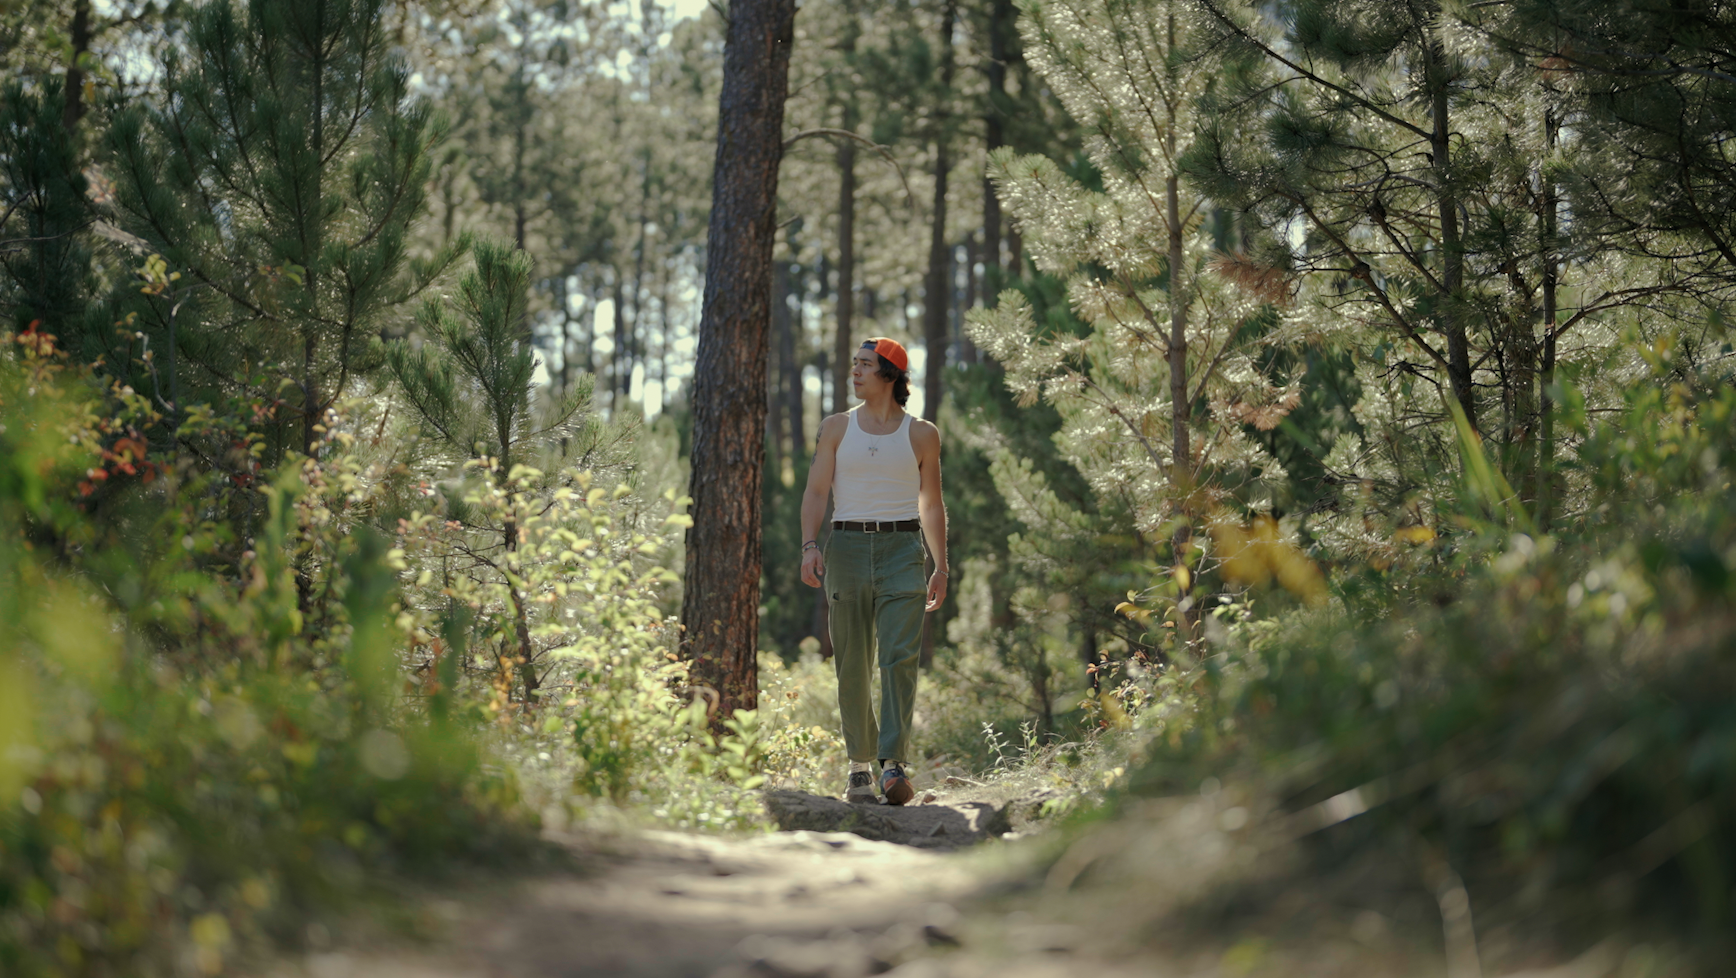 A person of medium skin tone wearing green cargo, a white tank top, and an orange bandana on their head walking in a forest area.